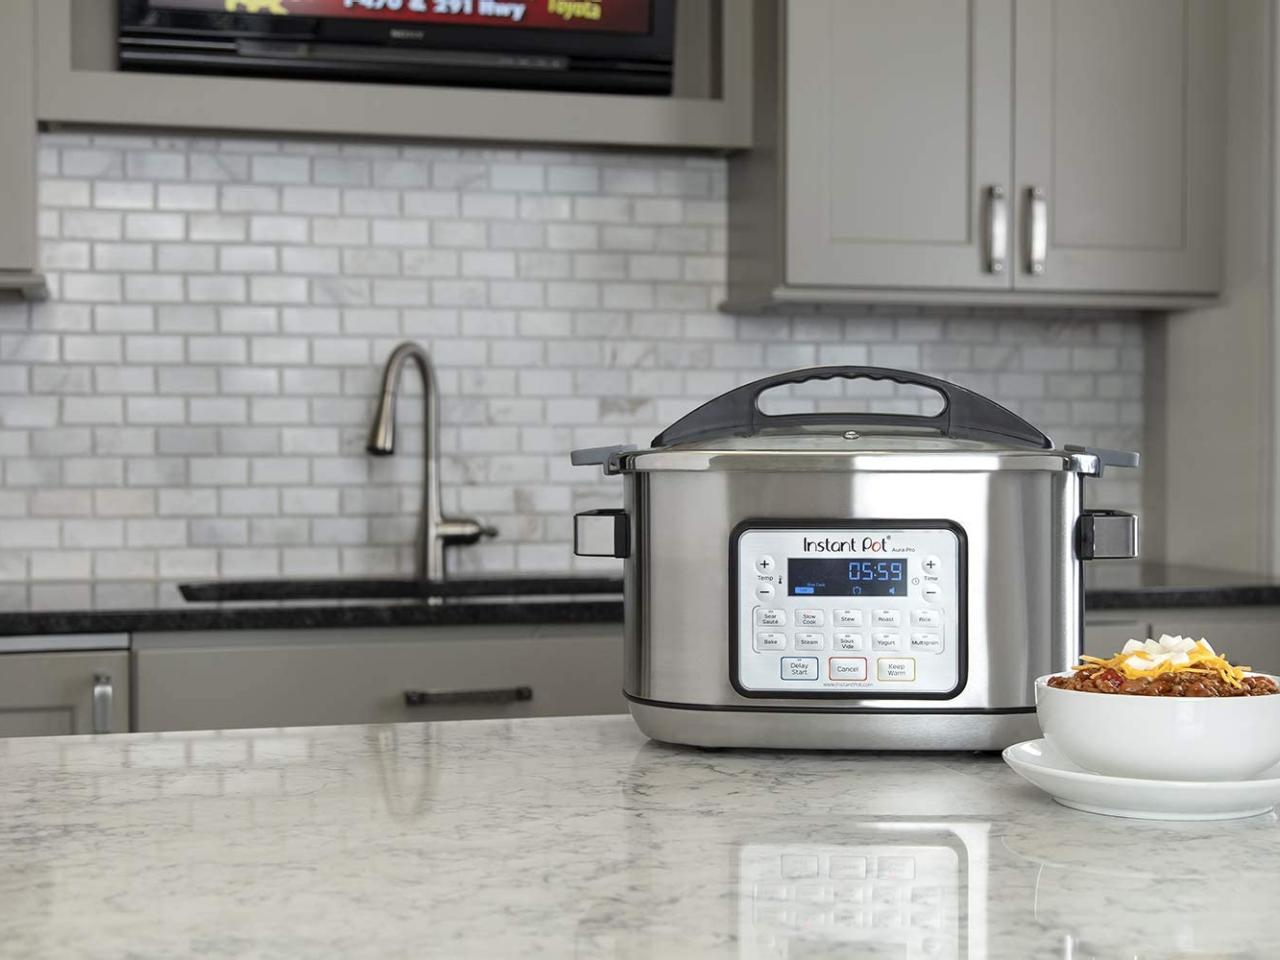 Upgrade your holiday kitchen arsenal with an 8-qt. Instant Pot